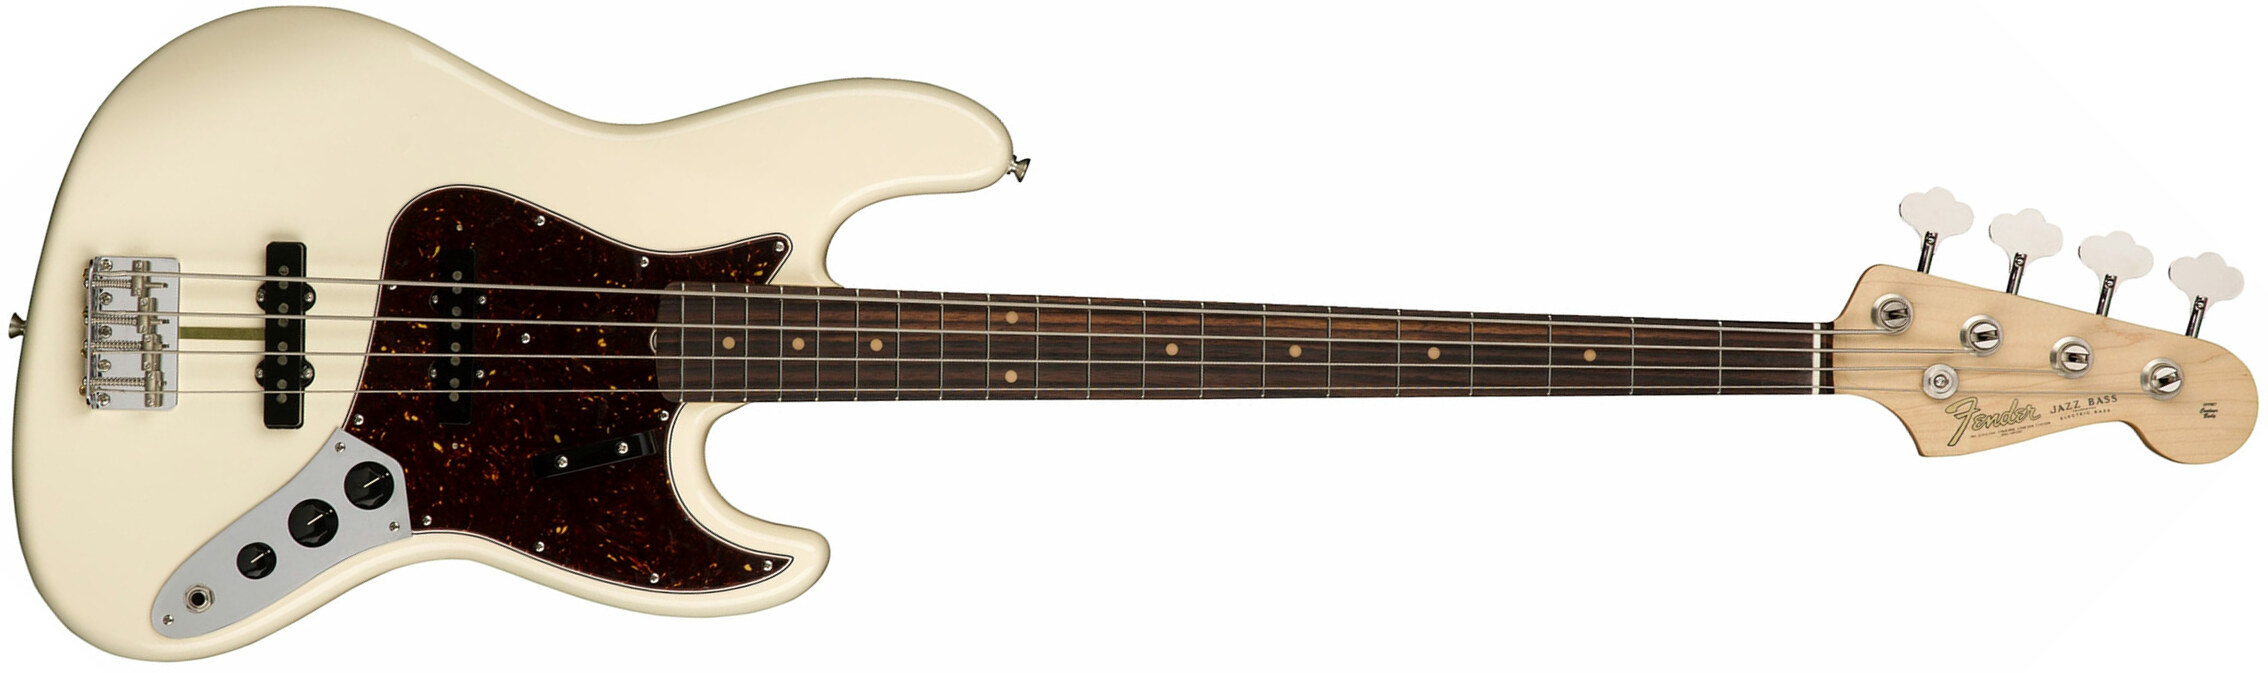 Fender Jazz Bass '60s American Original Usa Rw - Olympic White - Basse Électrique Solid Body - Main picture